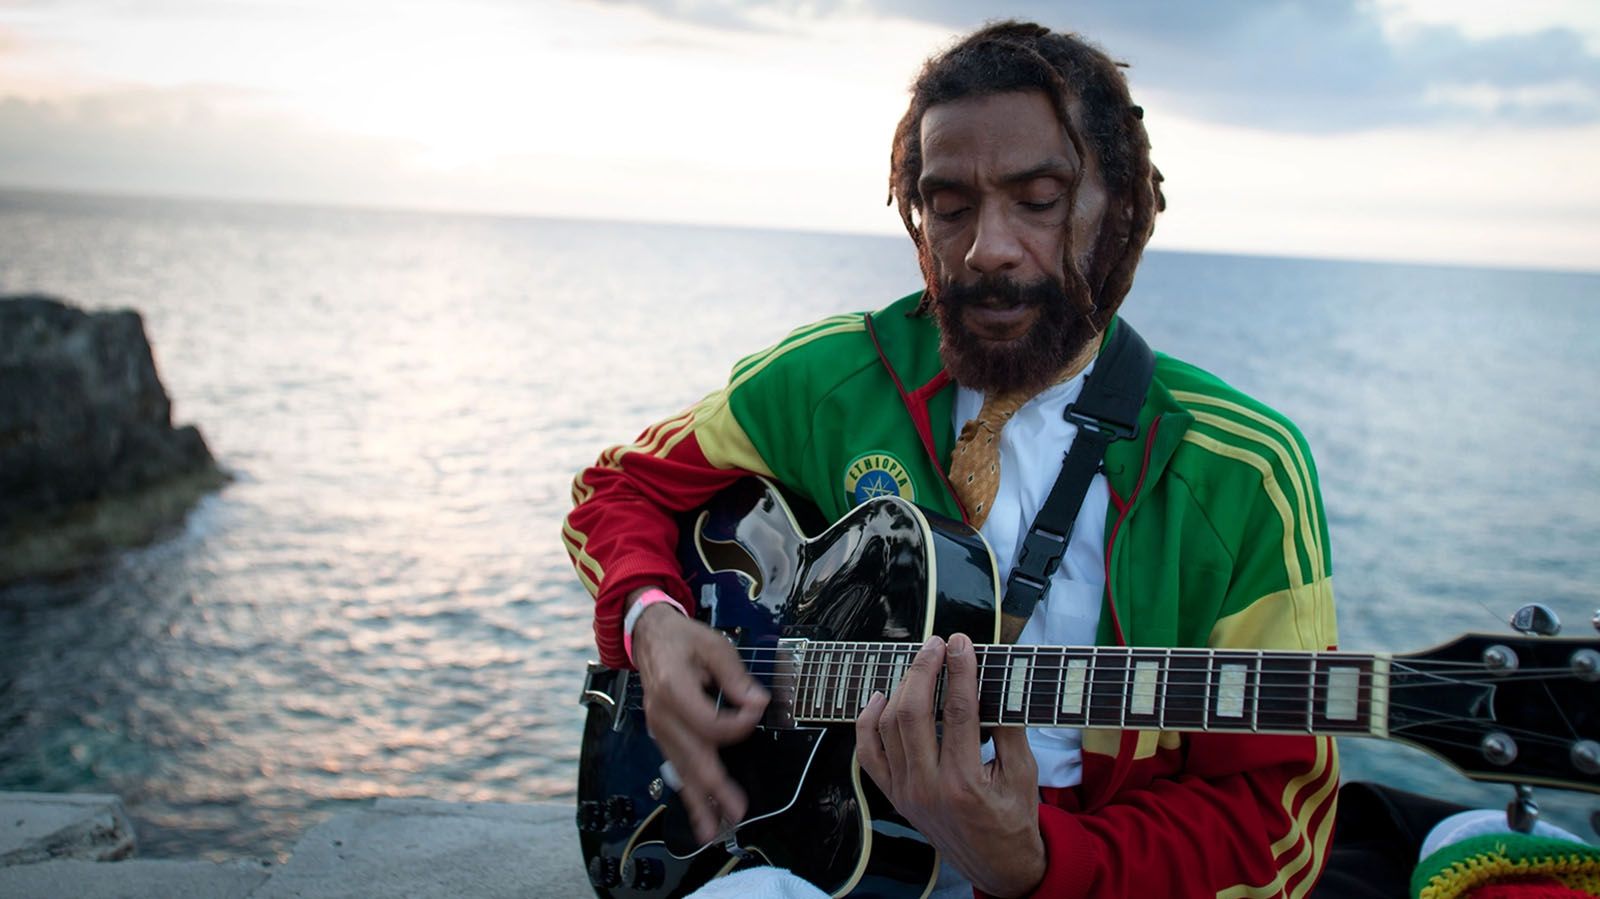 HR of Bad Brains will be at The Ruin on Aug. 19.